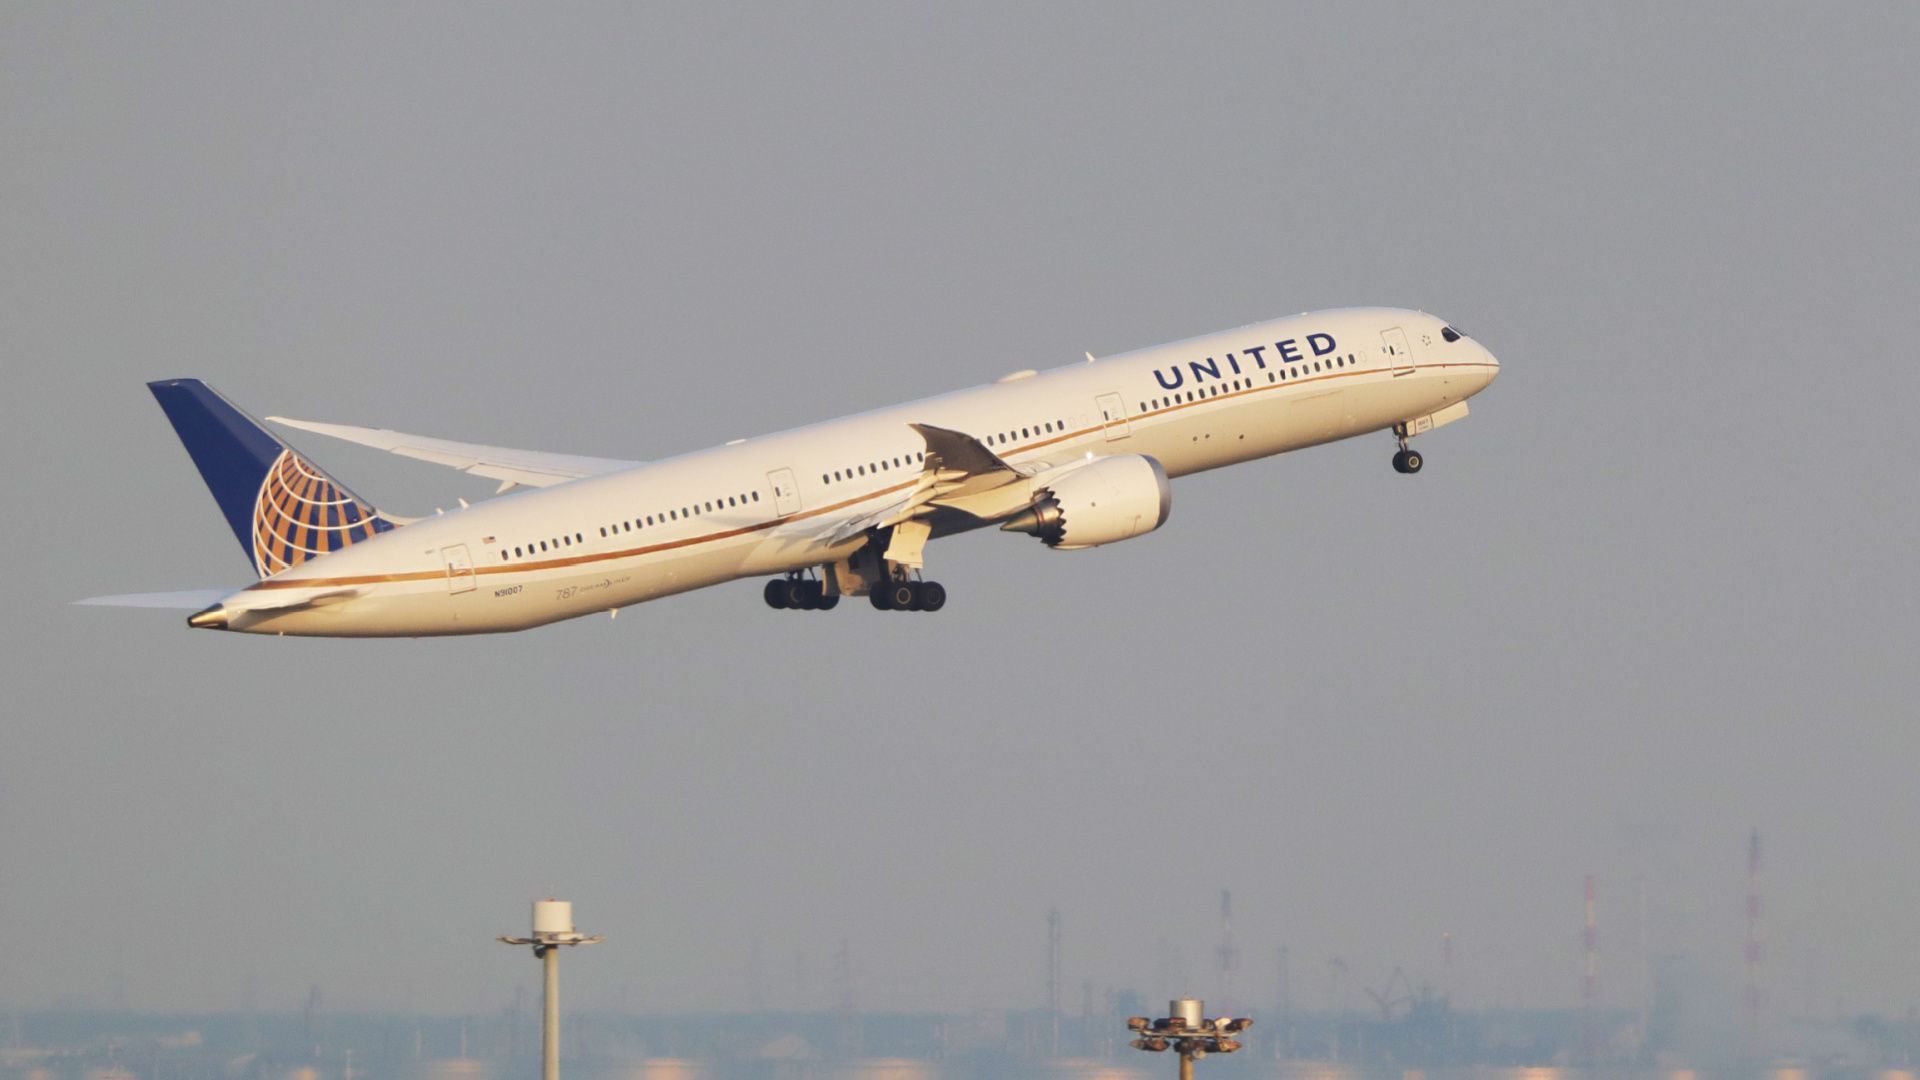 A United Airlines Boeing 787-9 taking off from Tokyo Haneda International Airport.